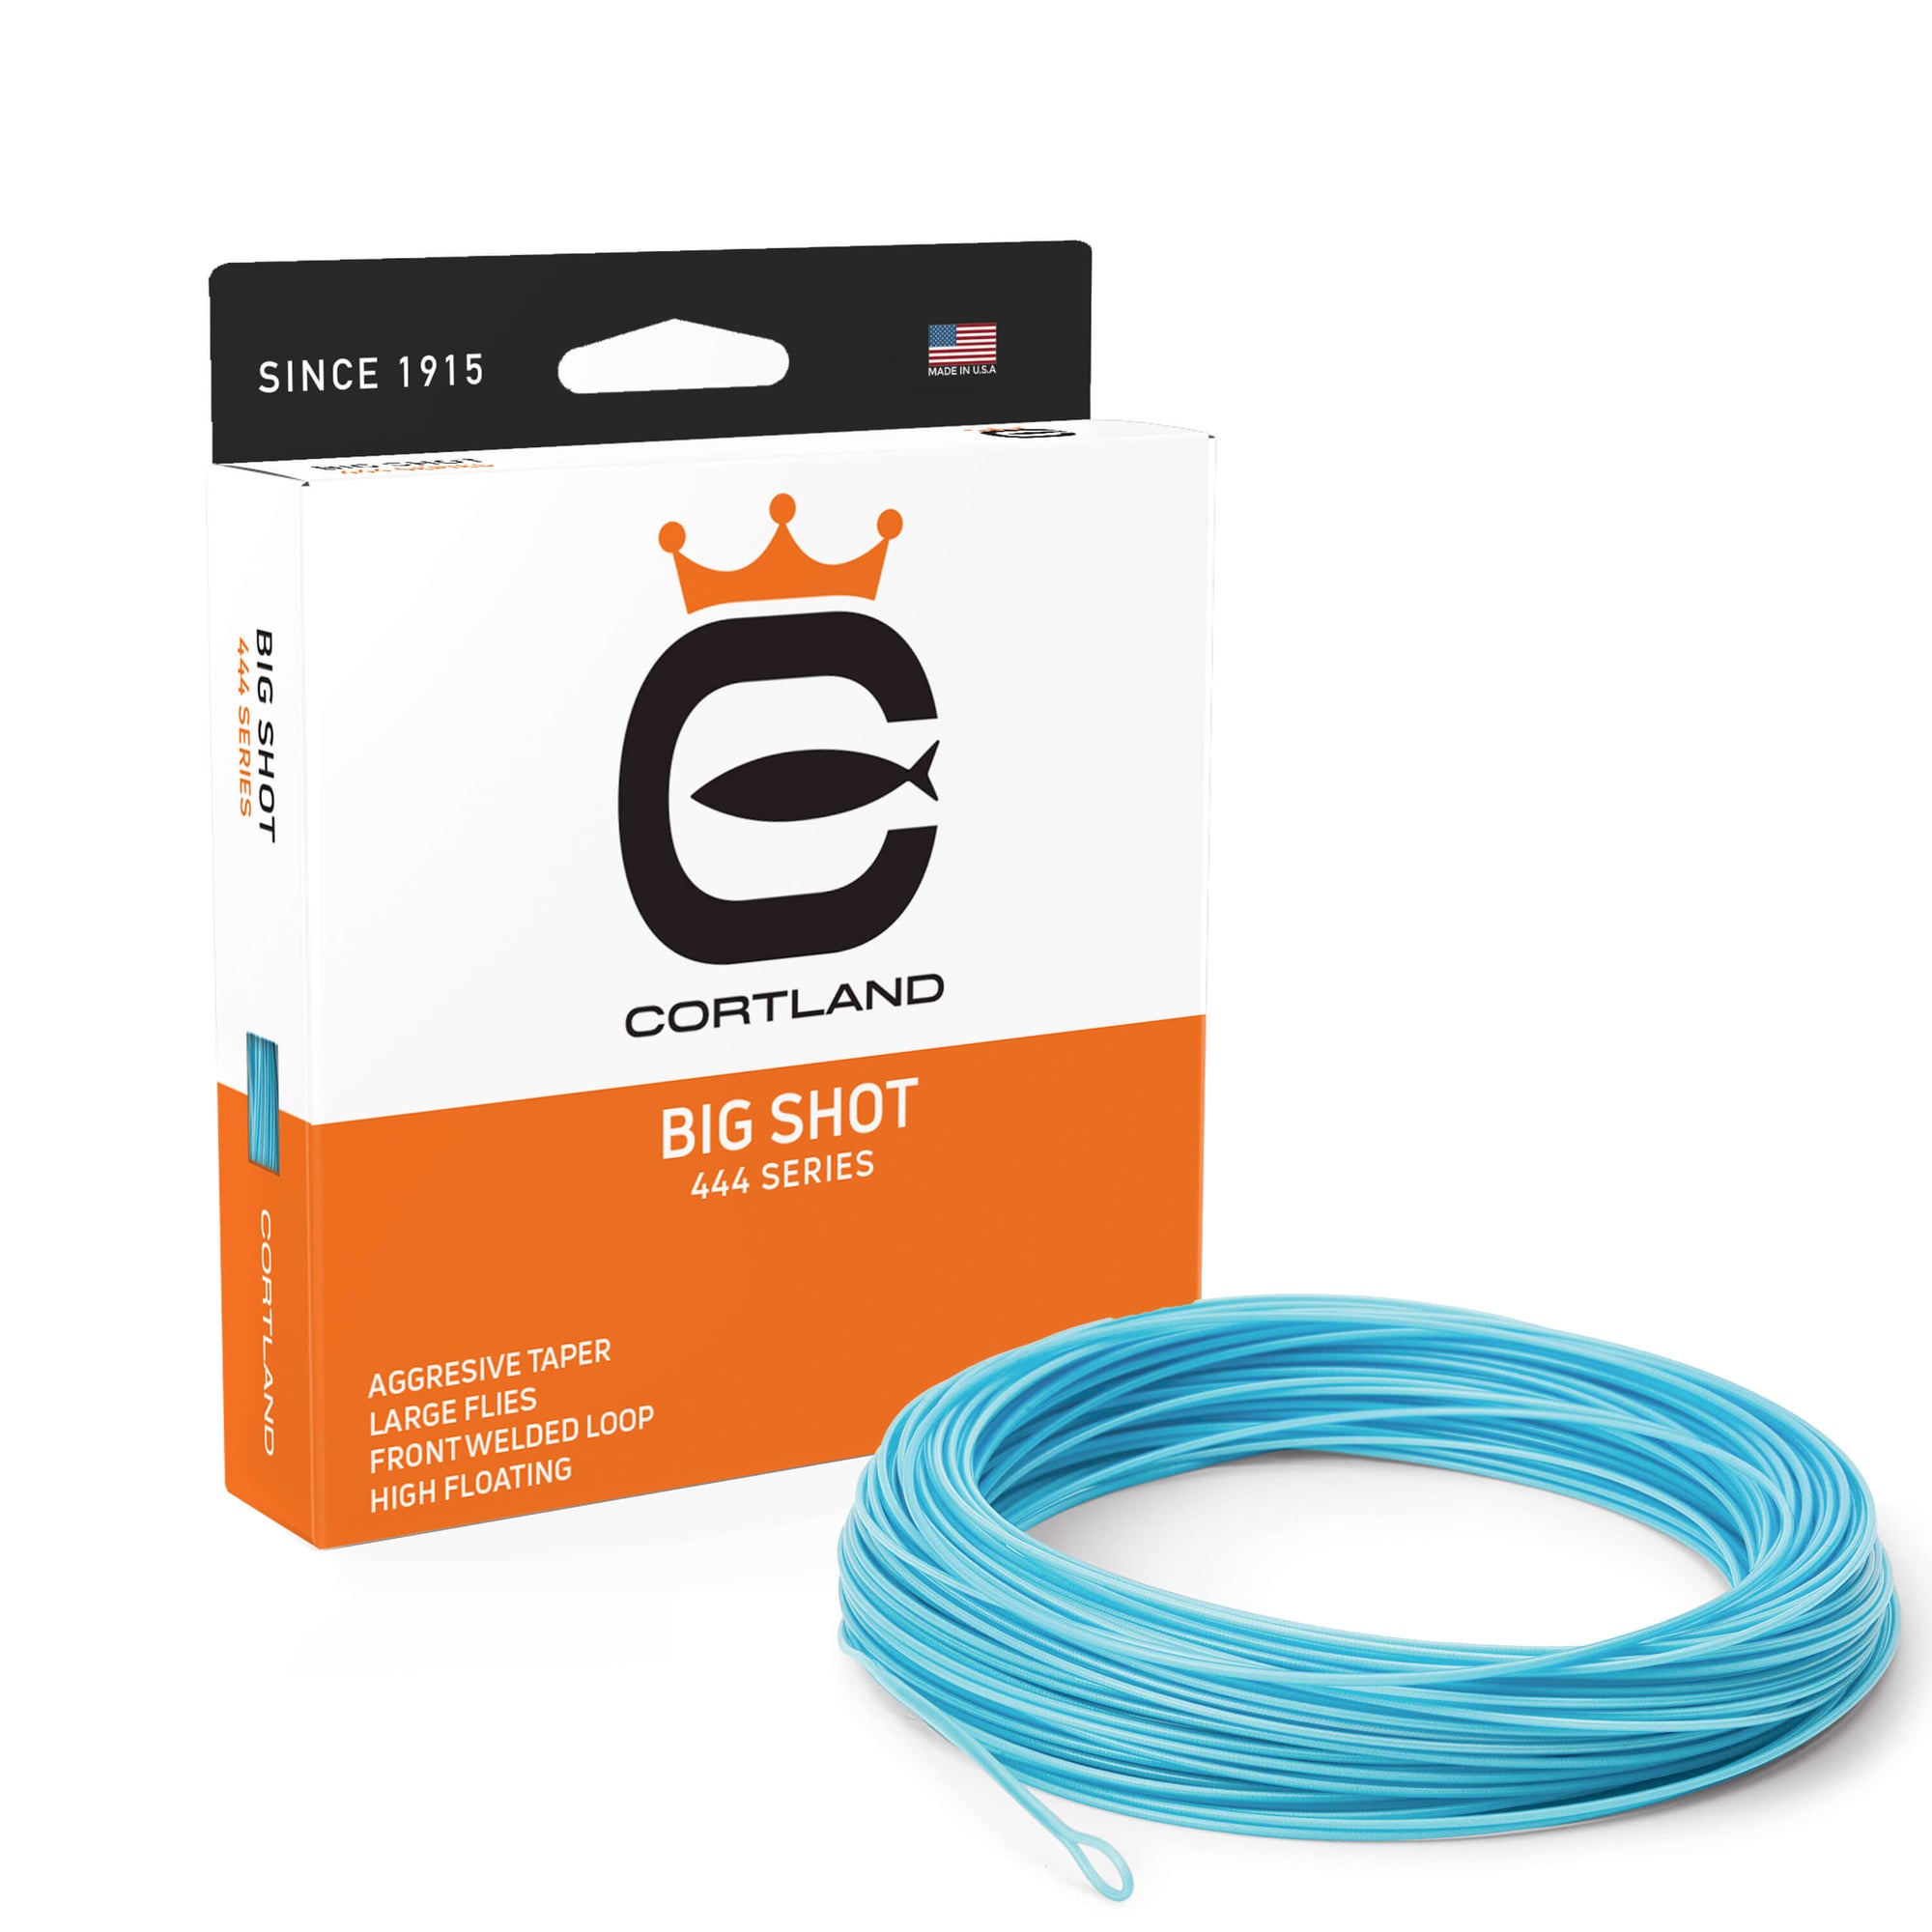 Big Shot Fly Line Box and coil. The coil is sky blue. The box has the Cortland logo and is orange and white. 